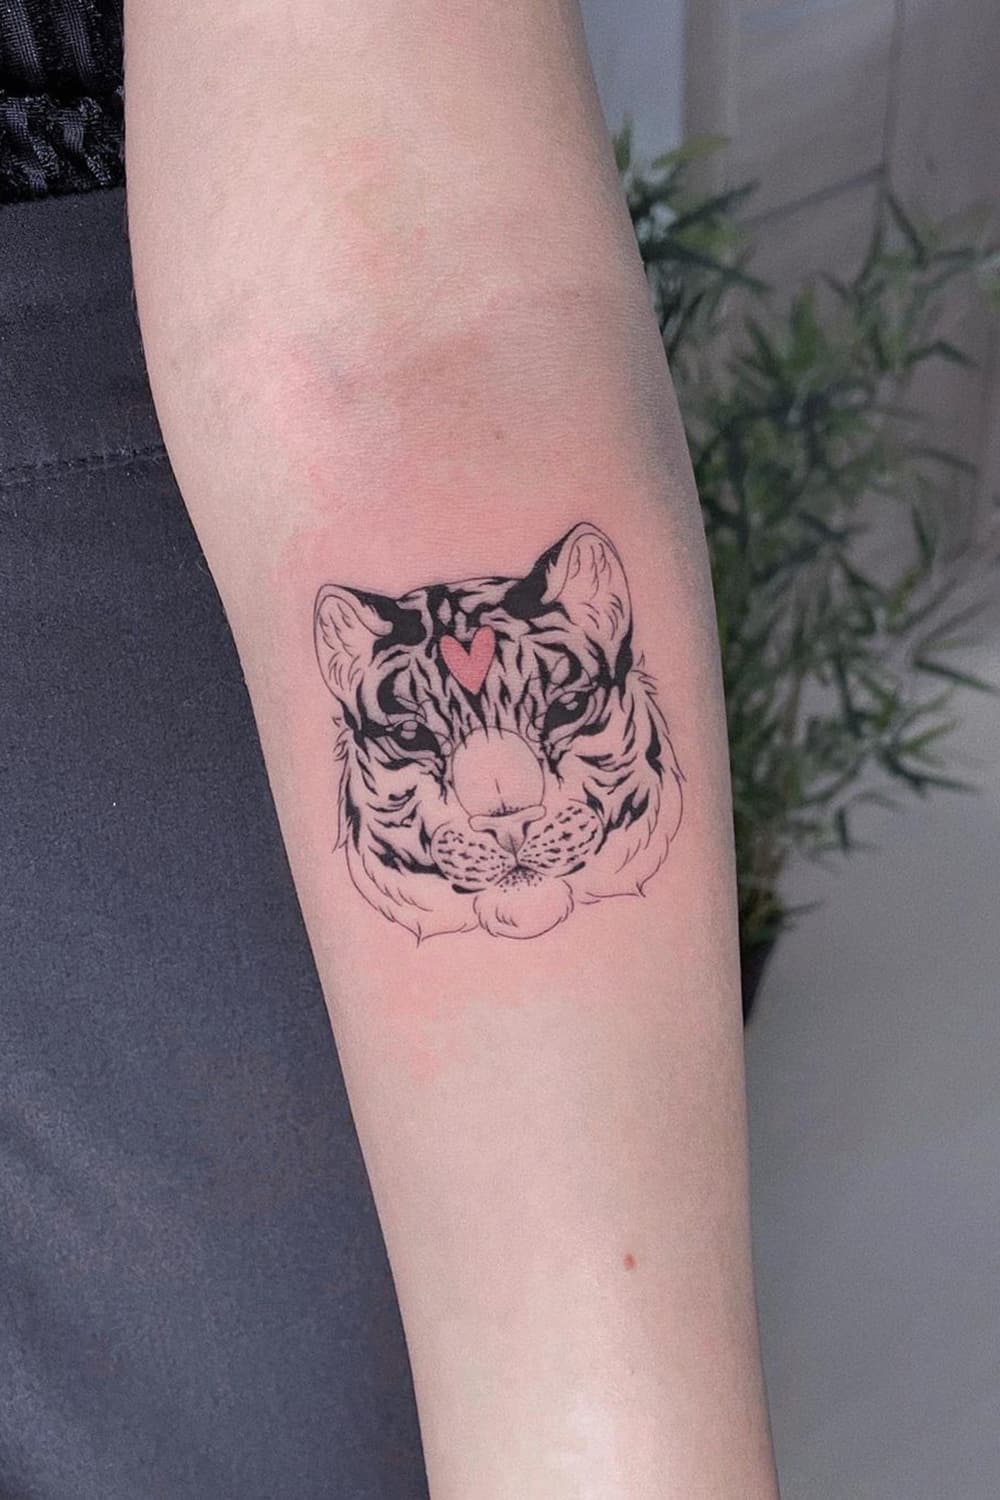 Tiger tattoo with heart